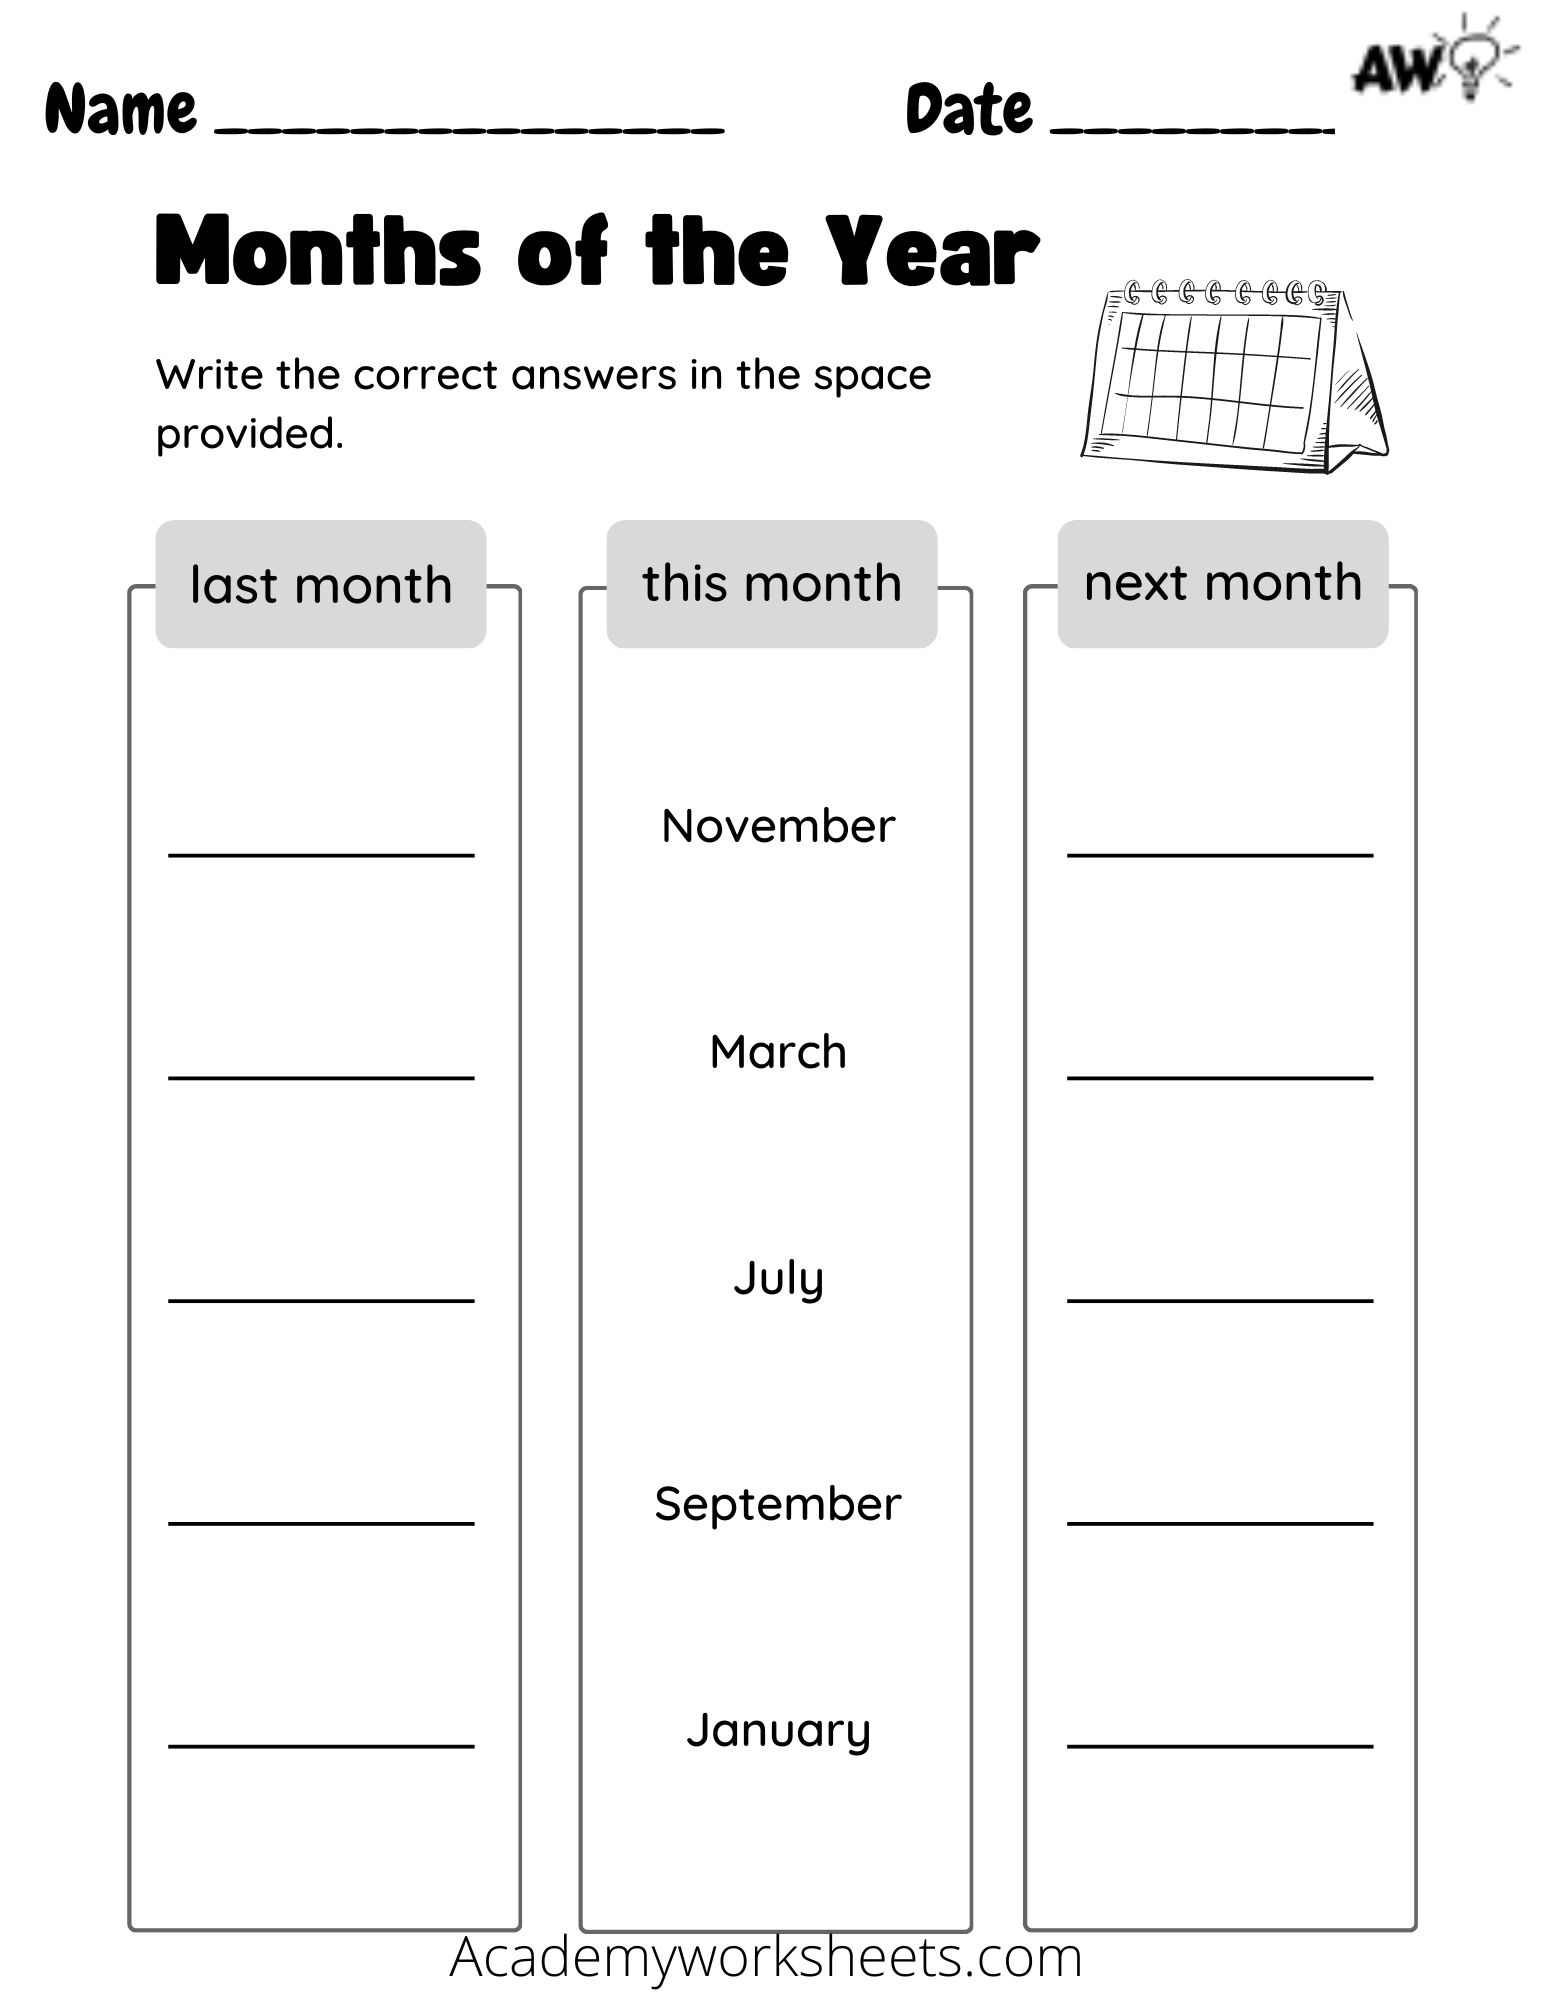 Months of the Year worksheets - Academy Worksheets